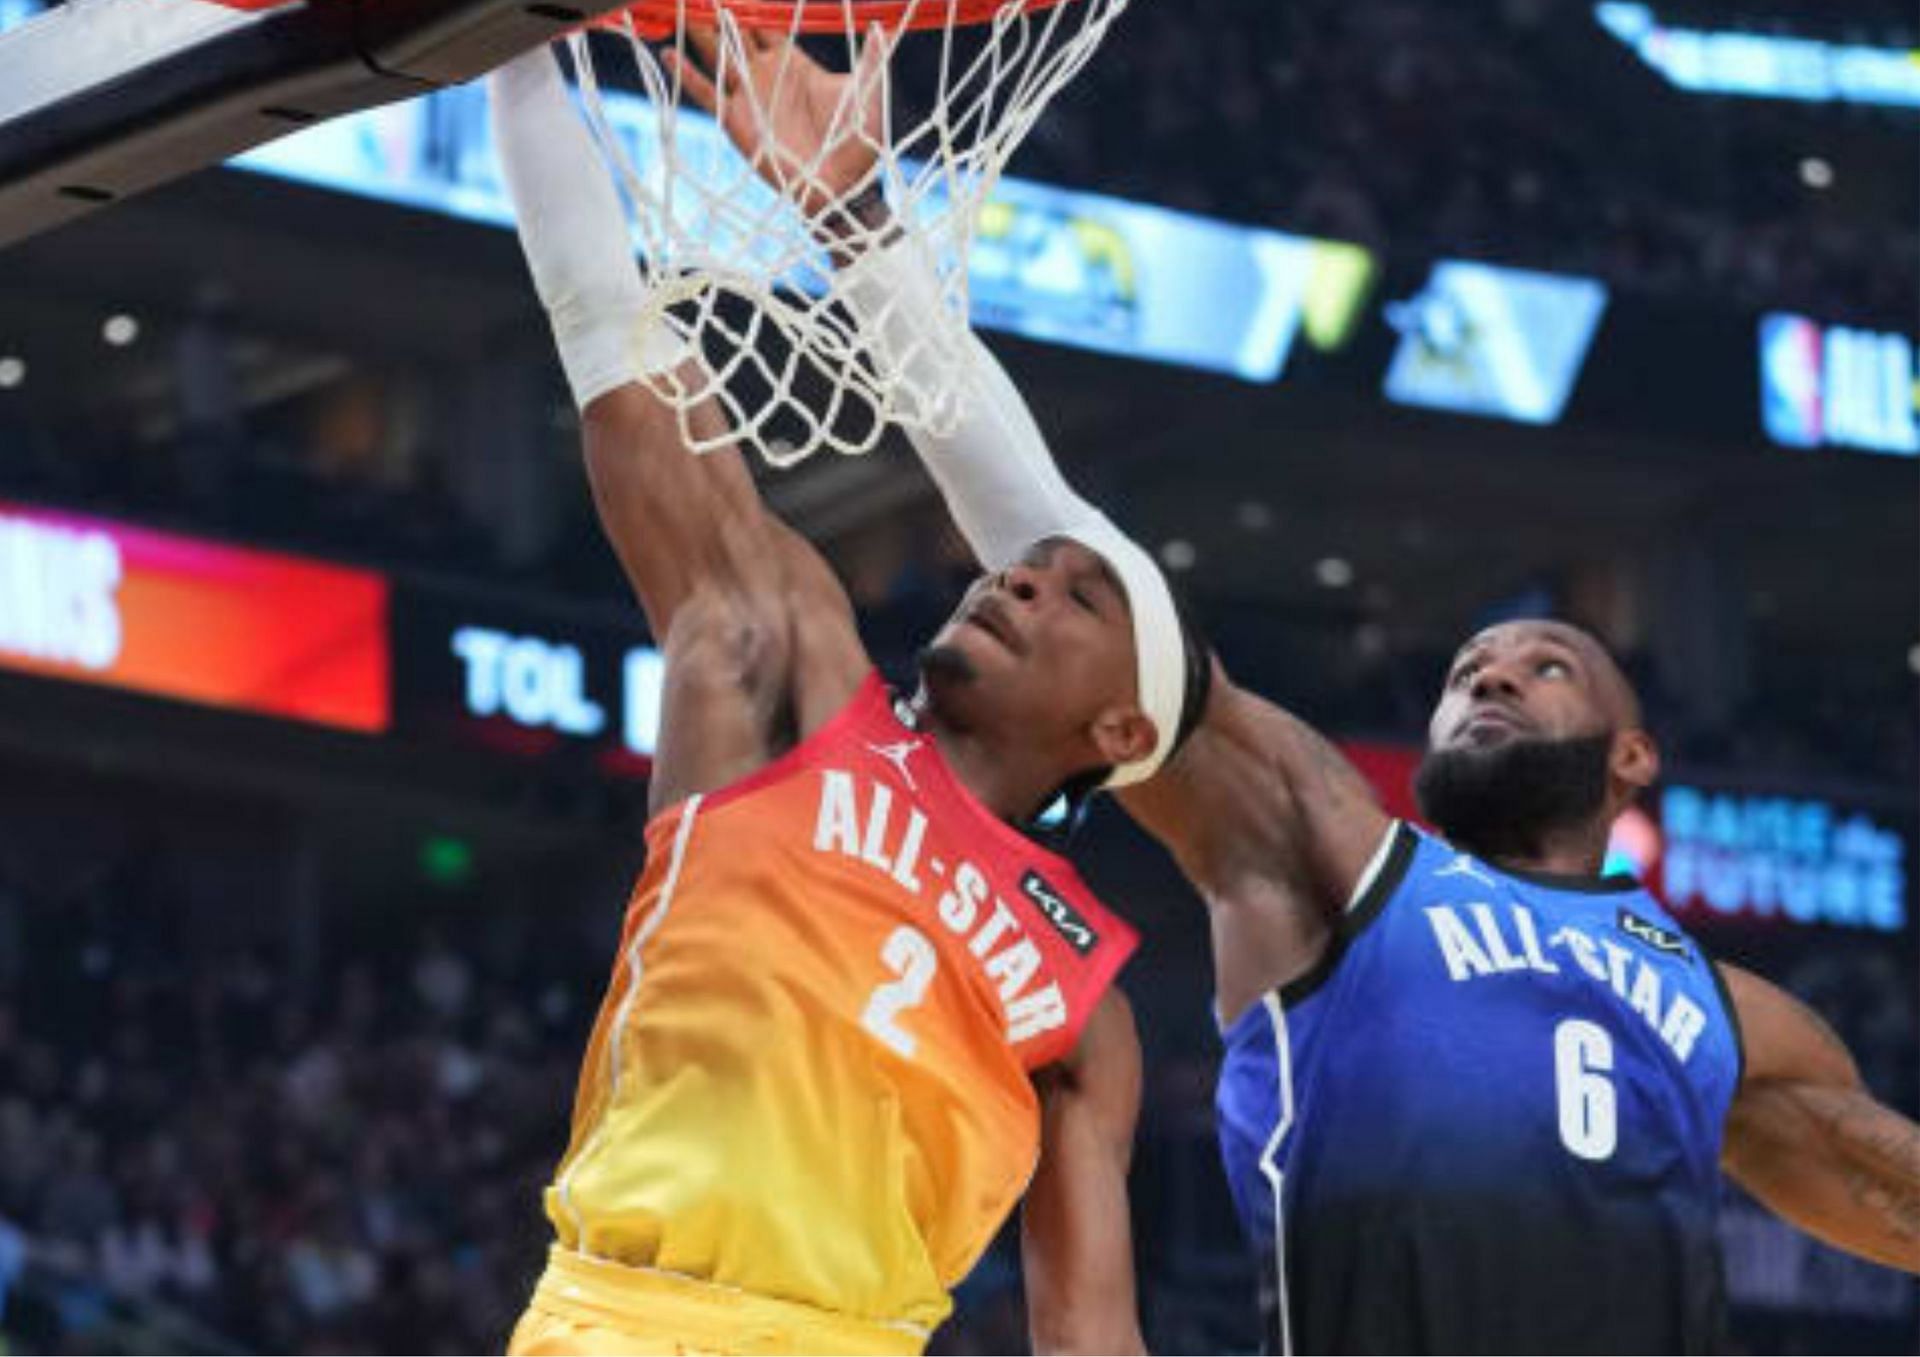 Shai Gilgeous-Alexander was surprised LeBron James blocked his dunk attempt in last night